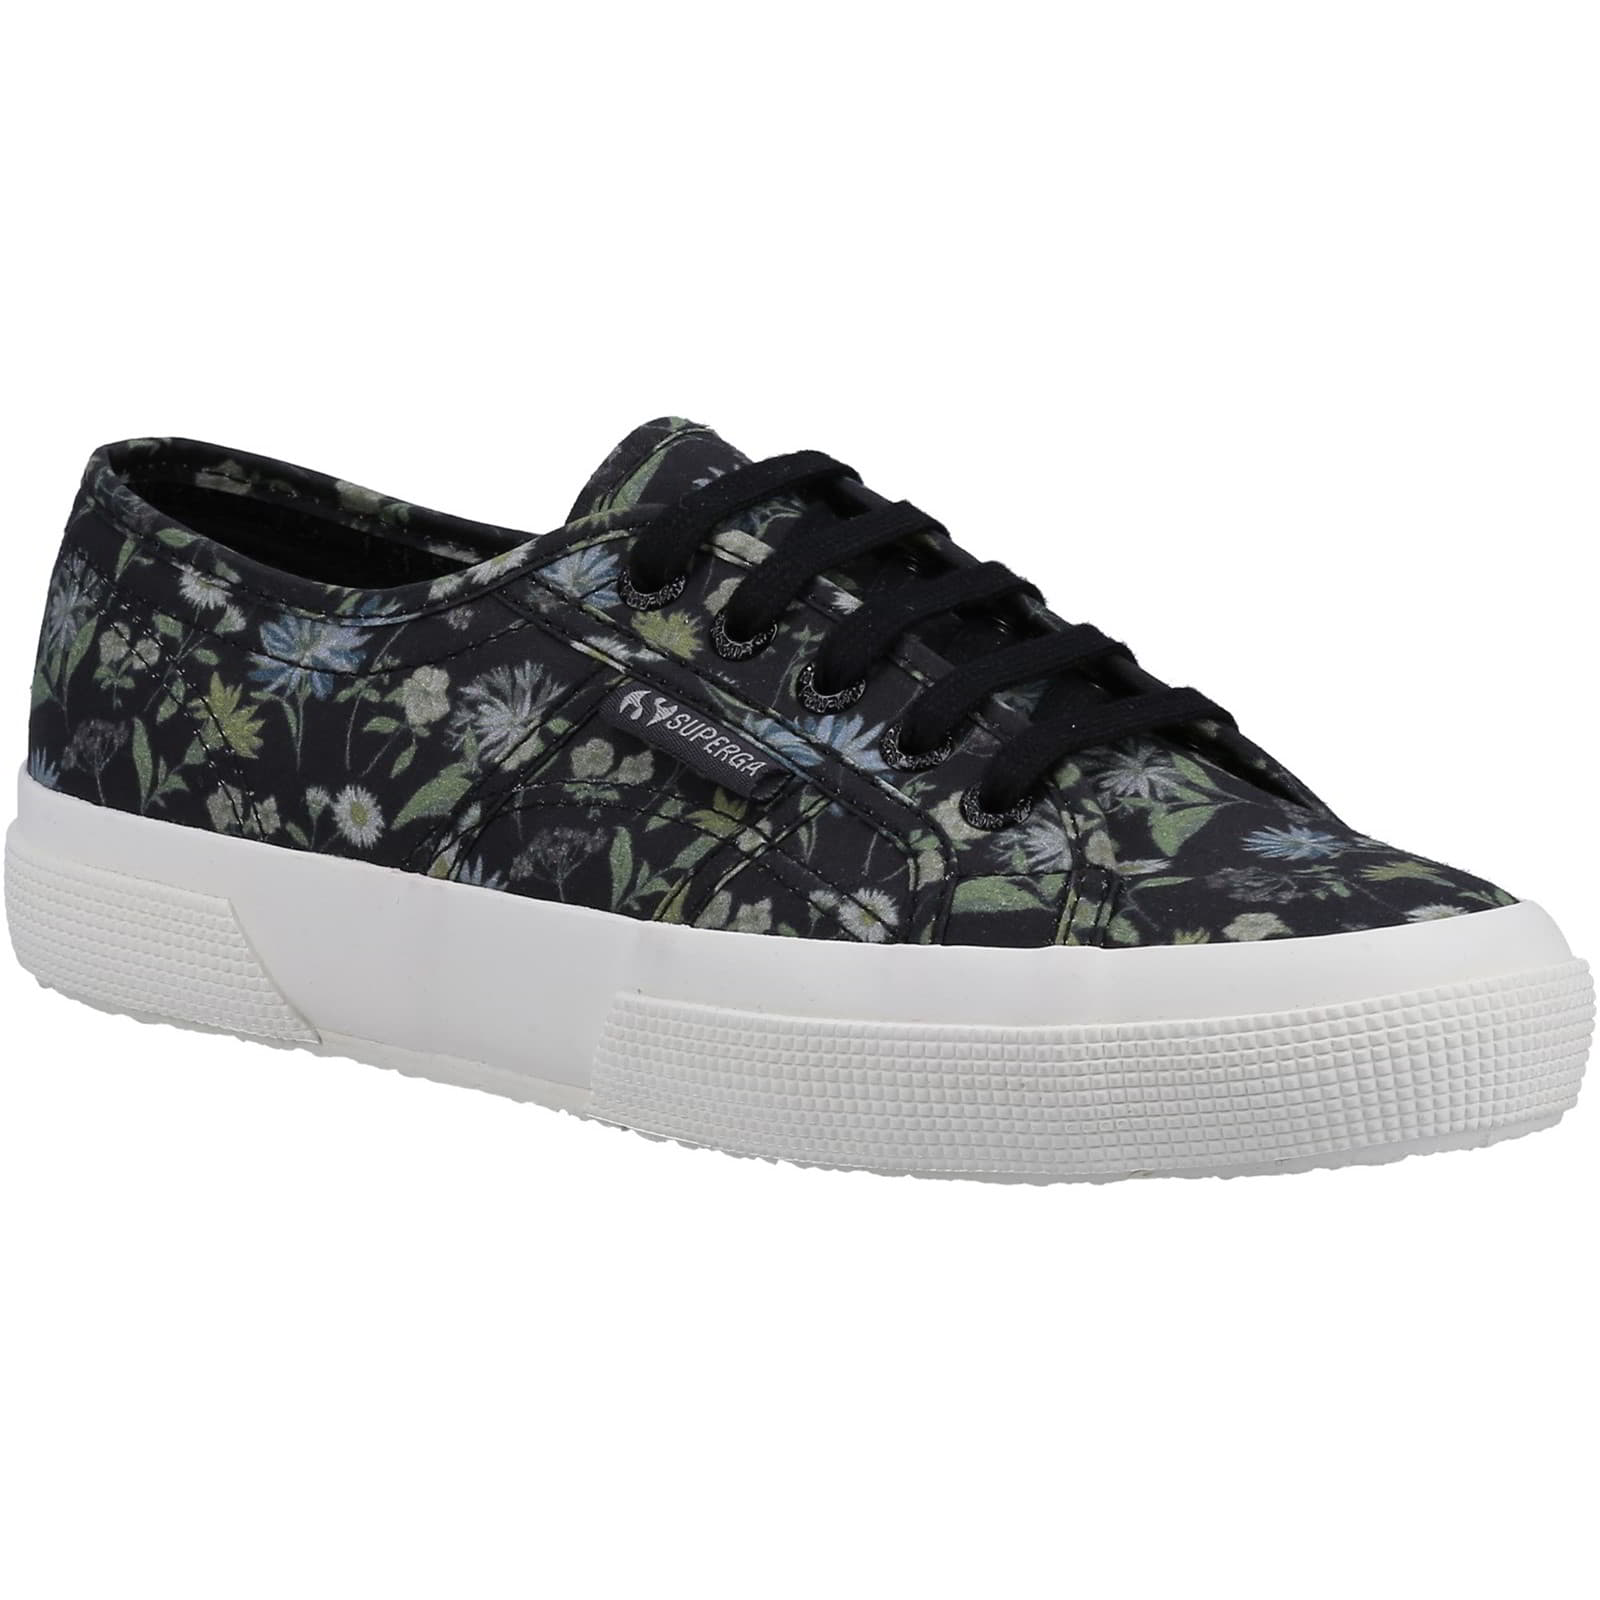 Superga Women's 2750 Floral Print Lace Up Trainers Shoes - UK 3.5